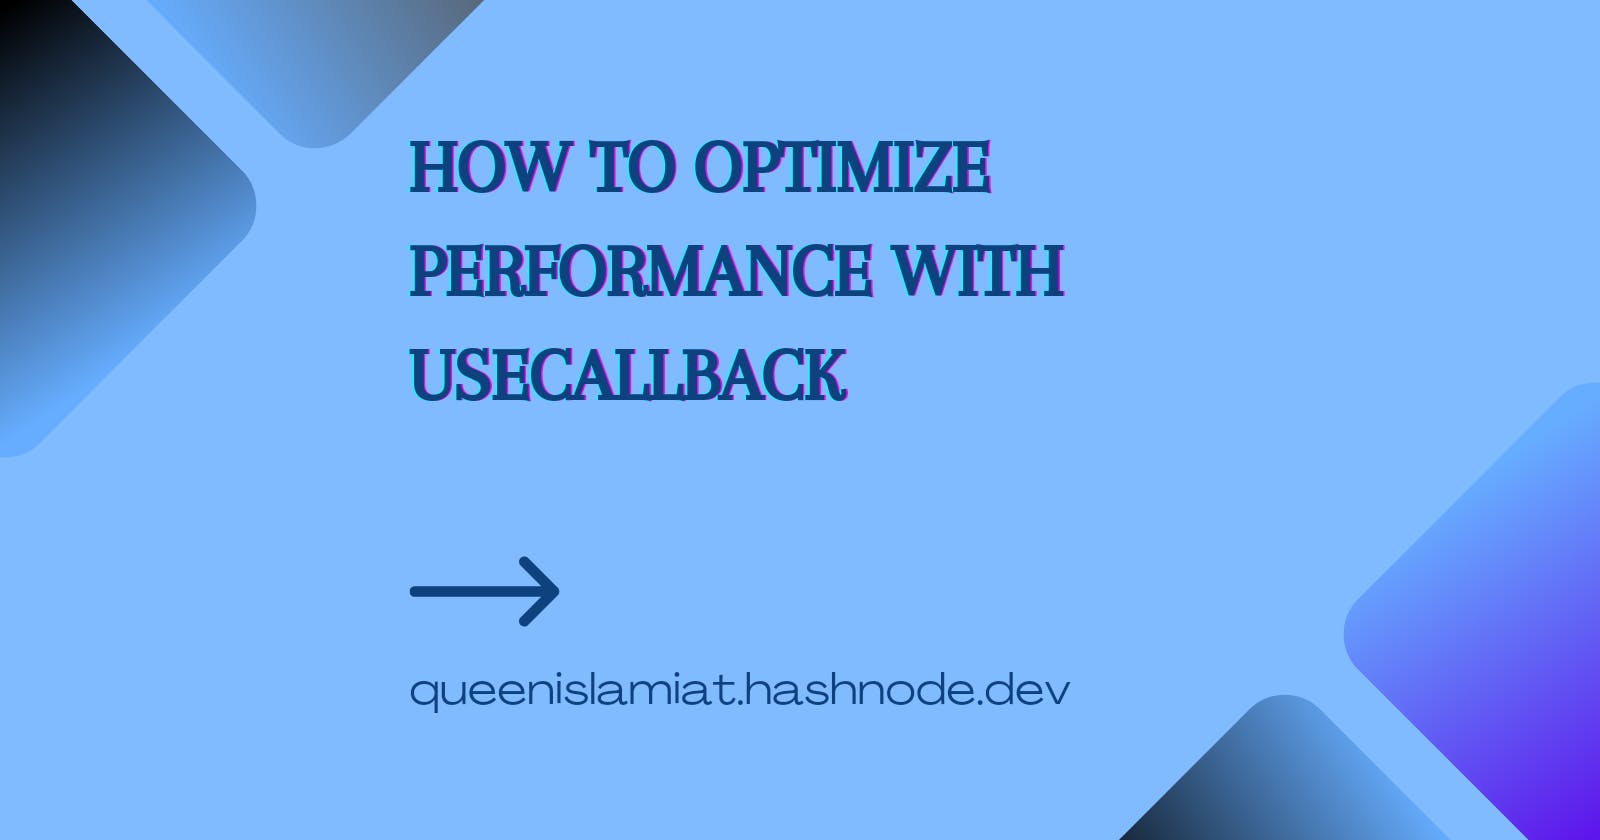 How to Optimize Performance with useCallback